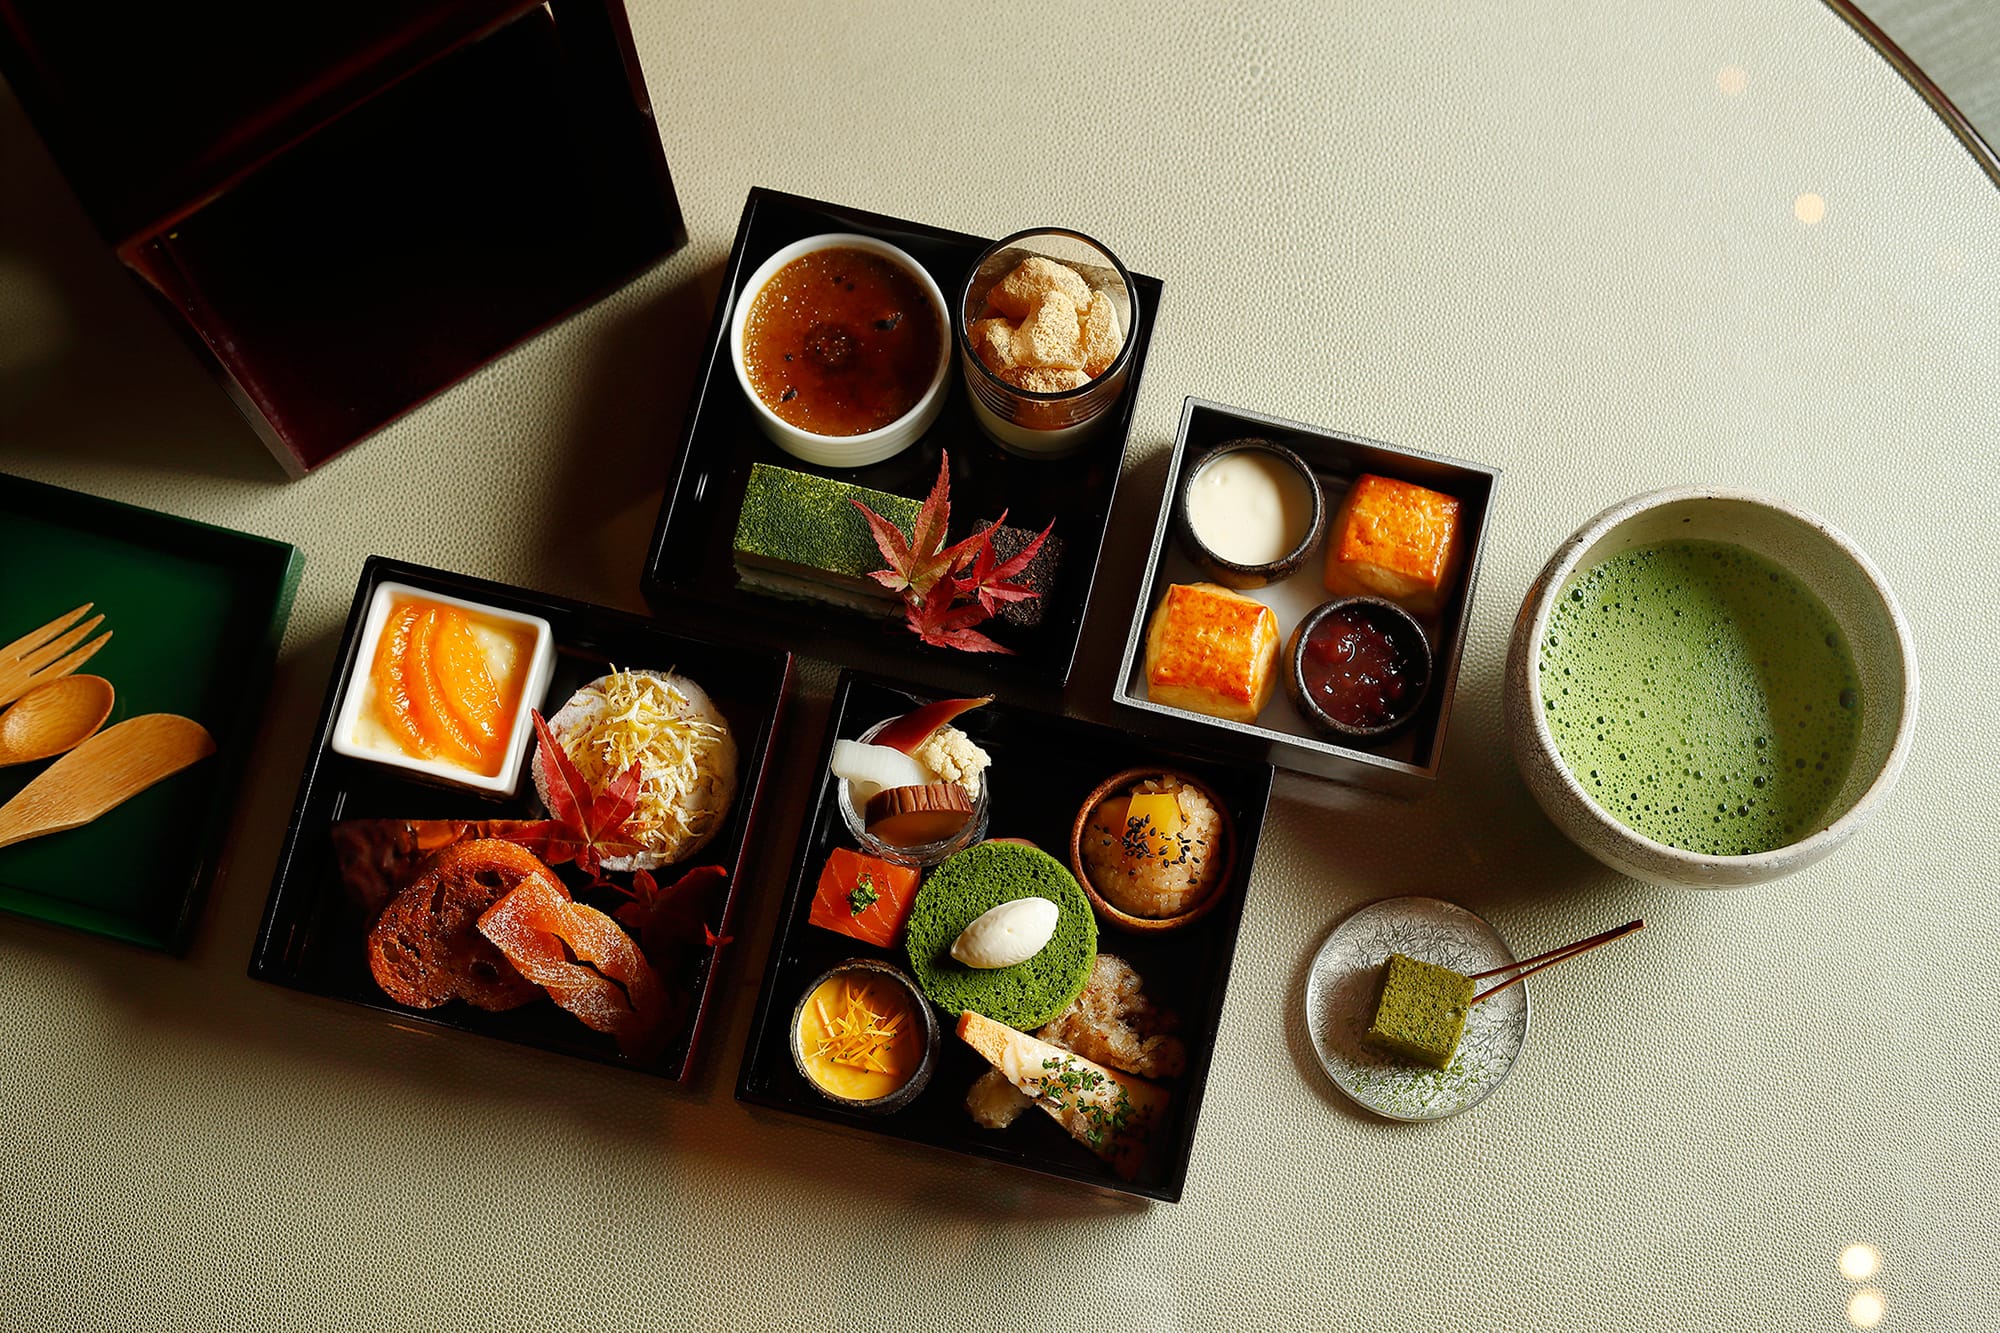  The three-tiered lacquerware boxes is filled with Japanese sweets using organic tea leaves and savories to pair with matcha.